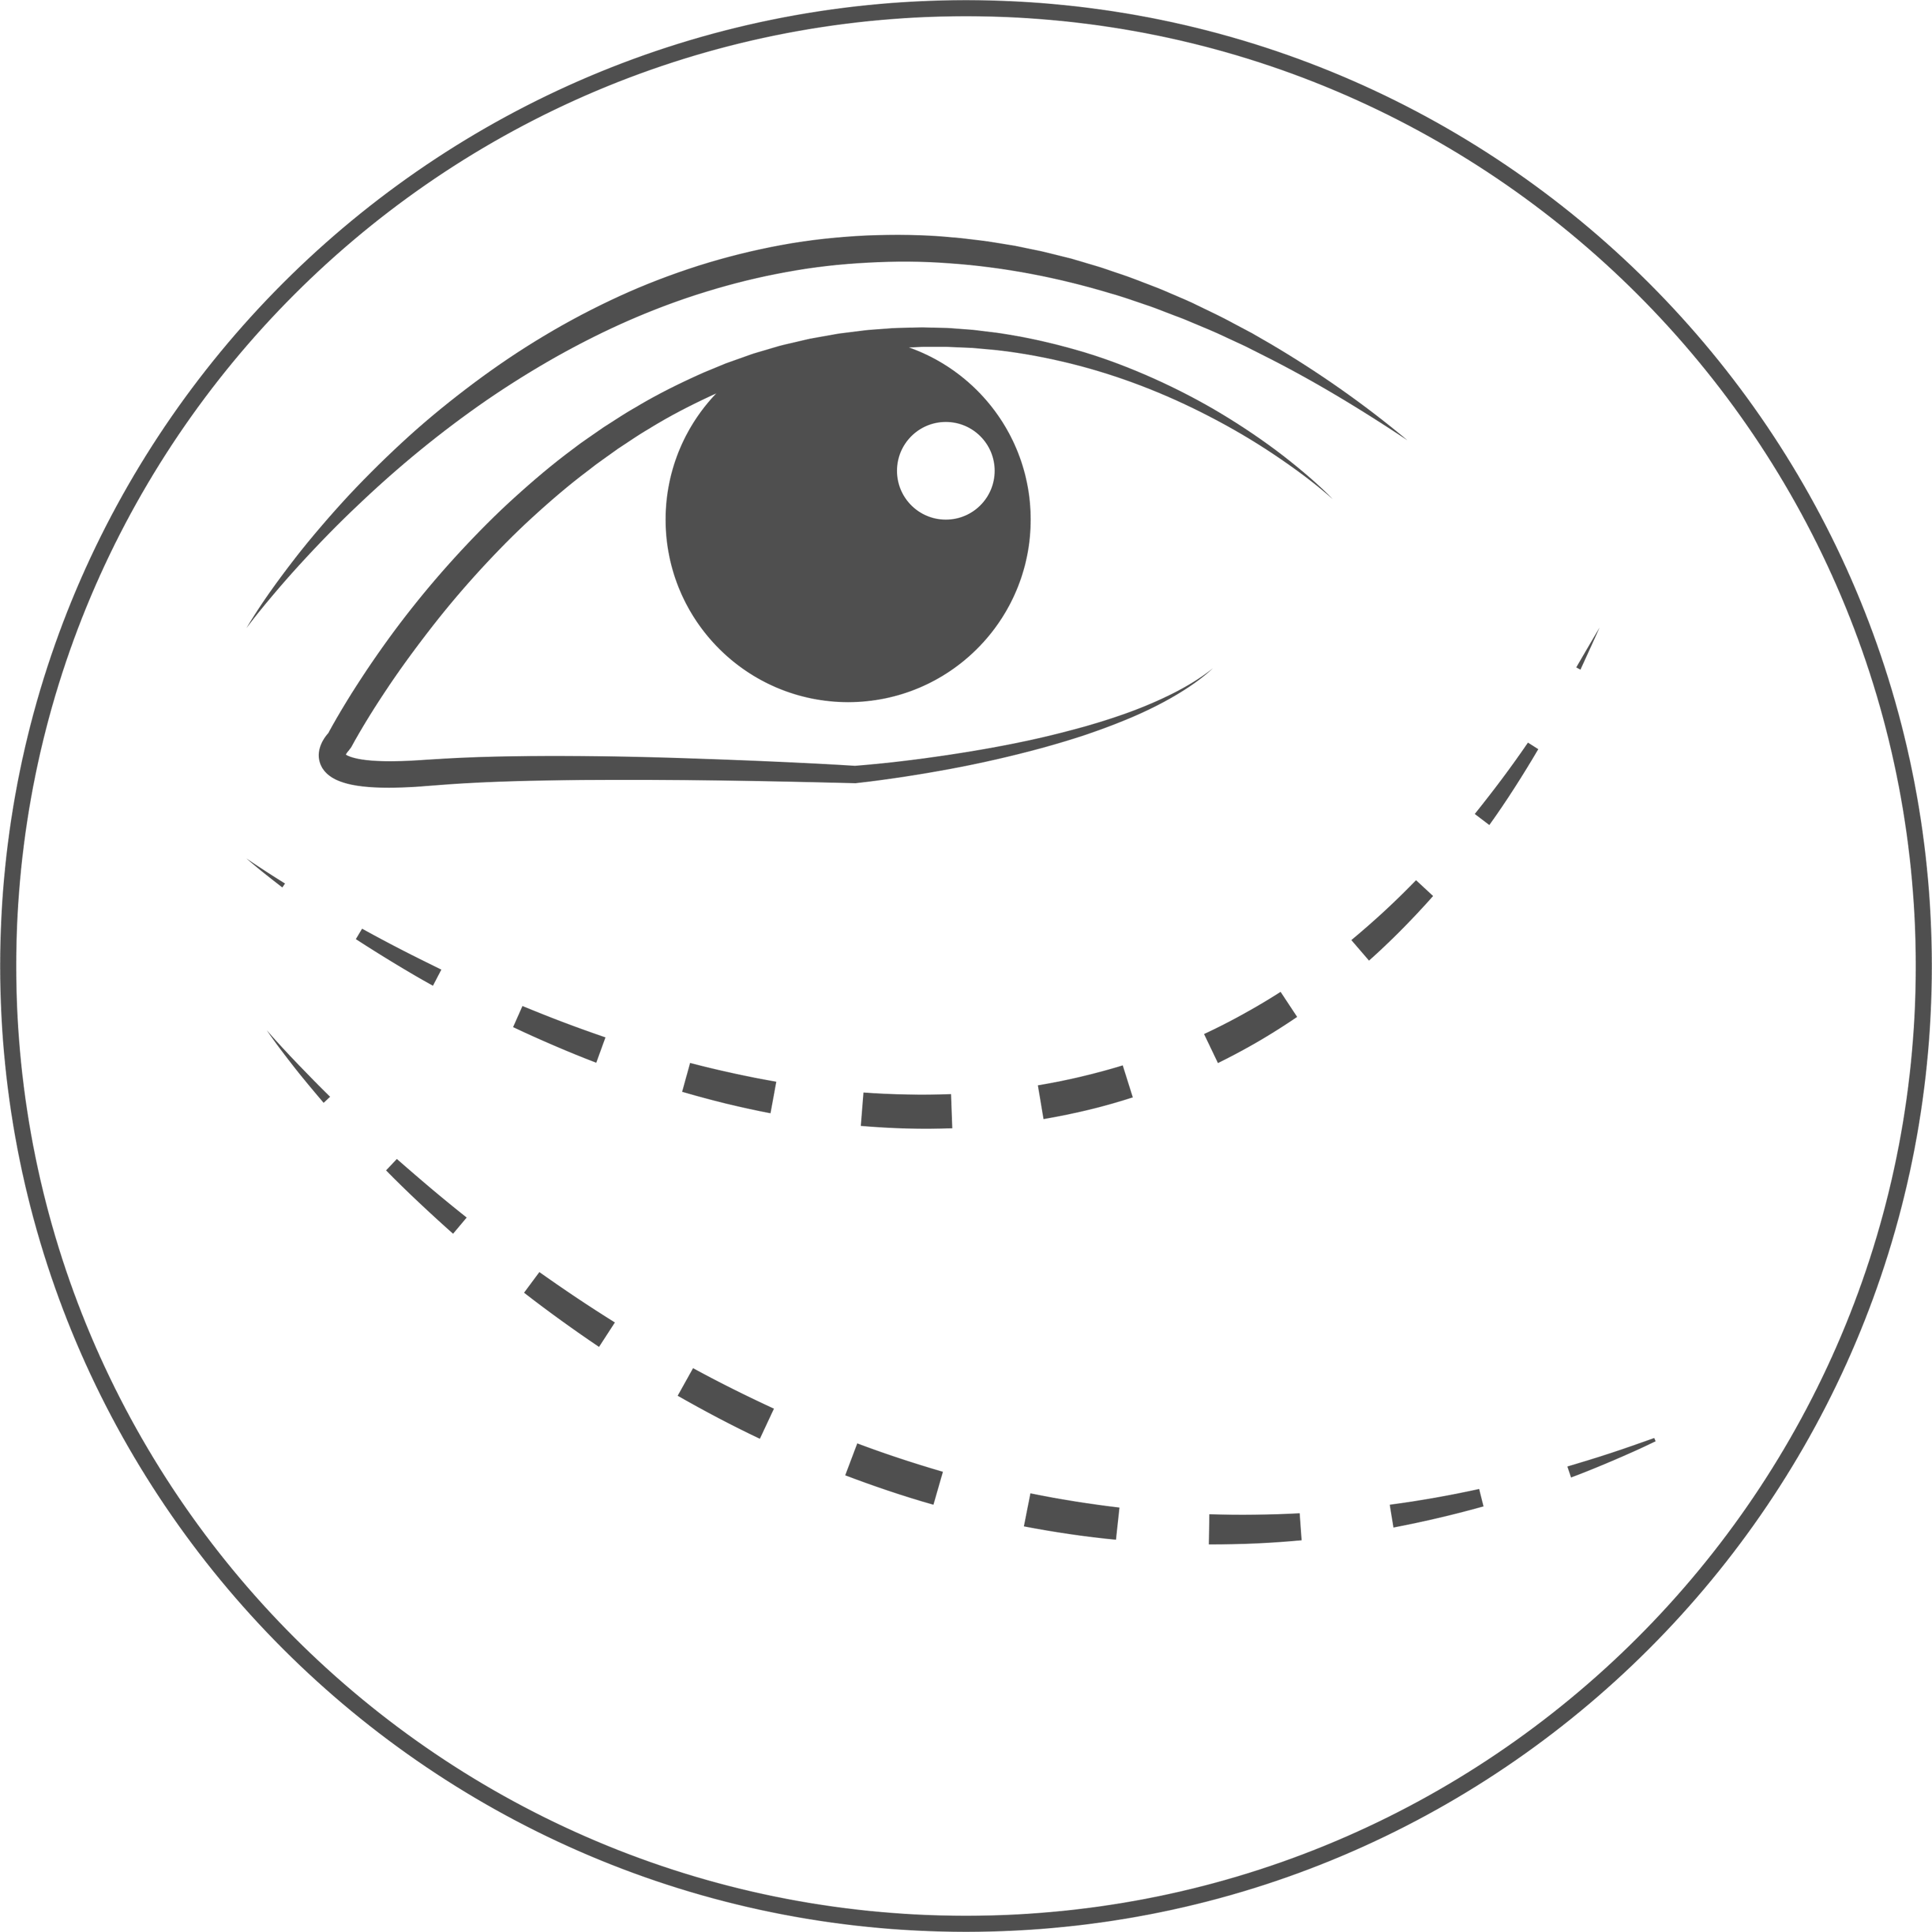 Illustration of an eye with wrinkles